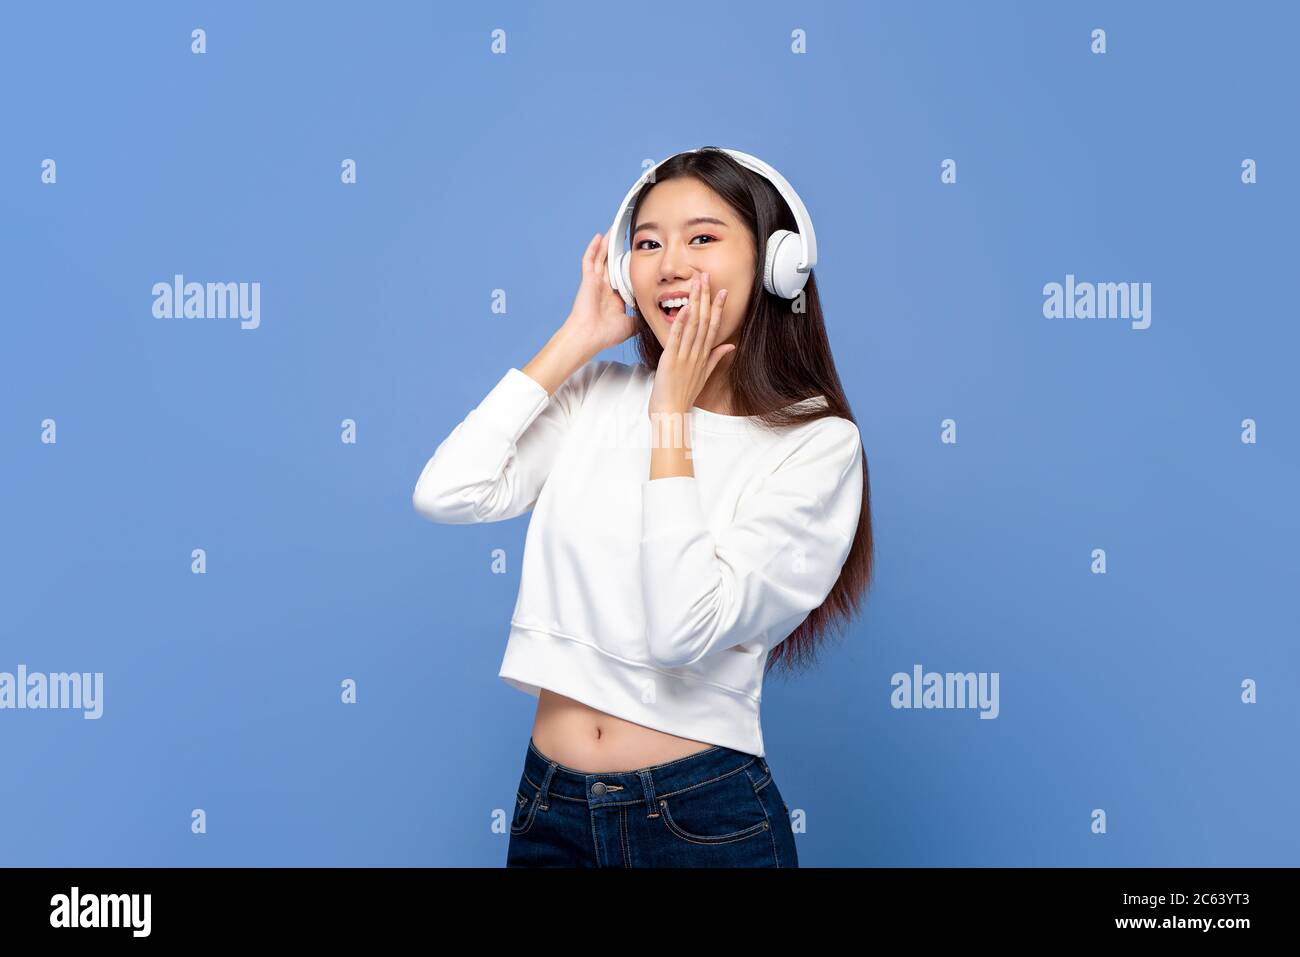 Young pretty Asian woman wearing wireless headphones listening to music isolated on light blue background Stock Photo